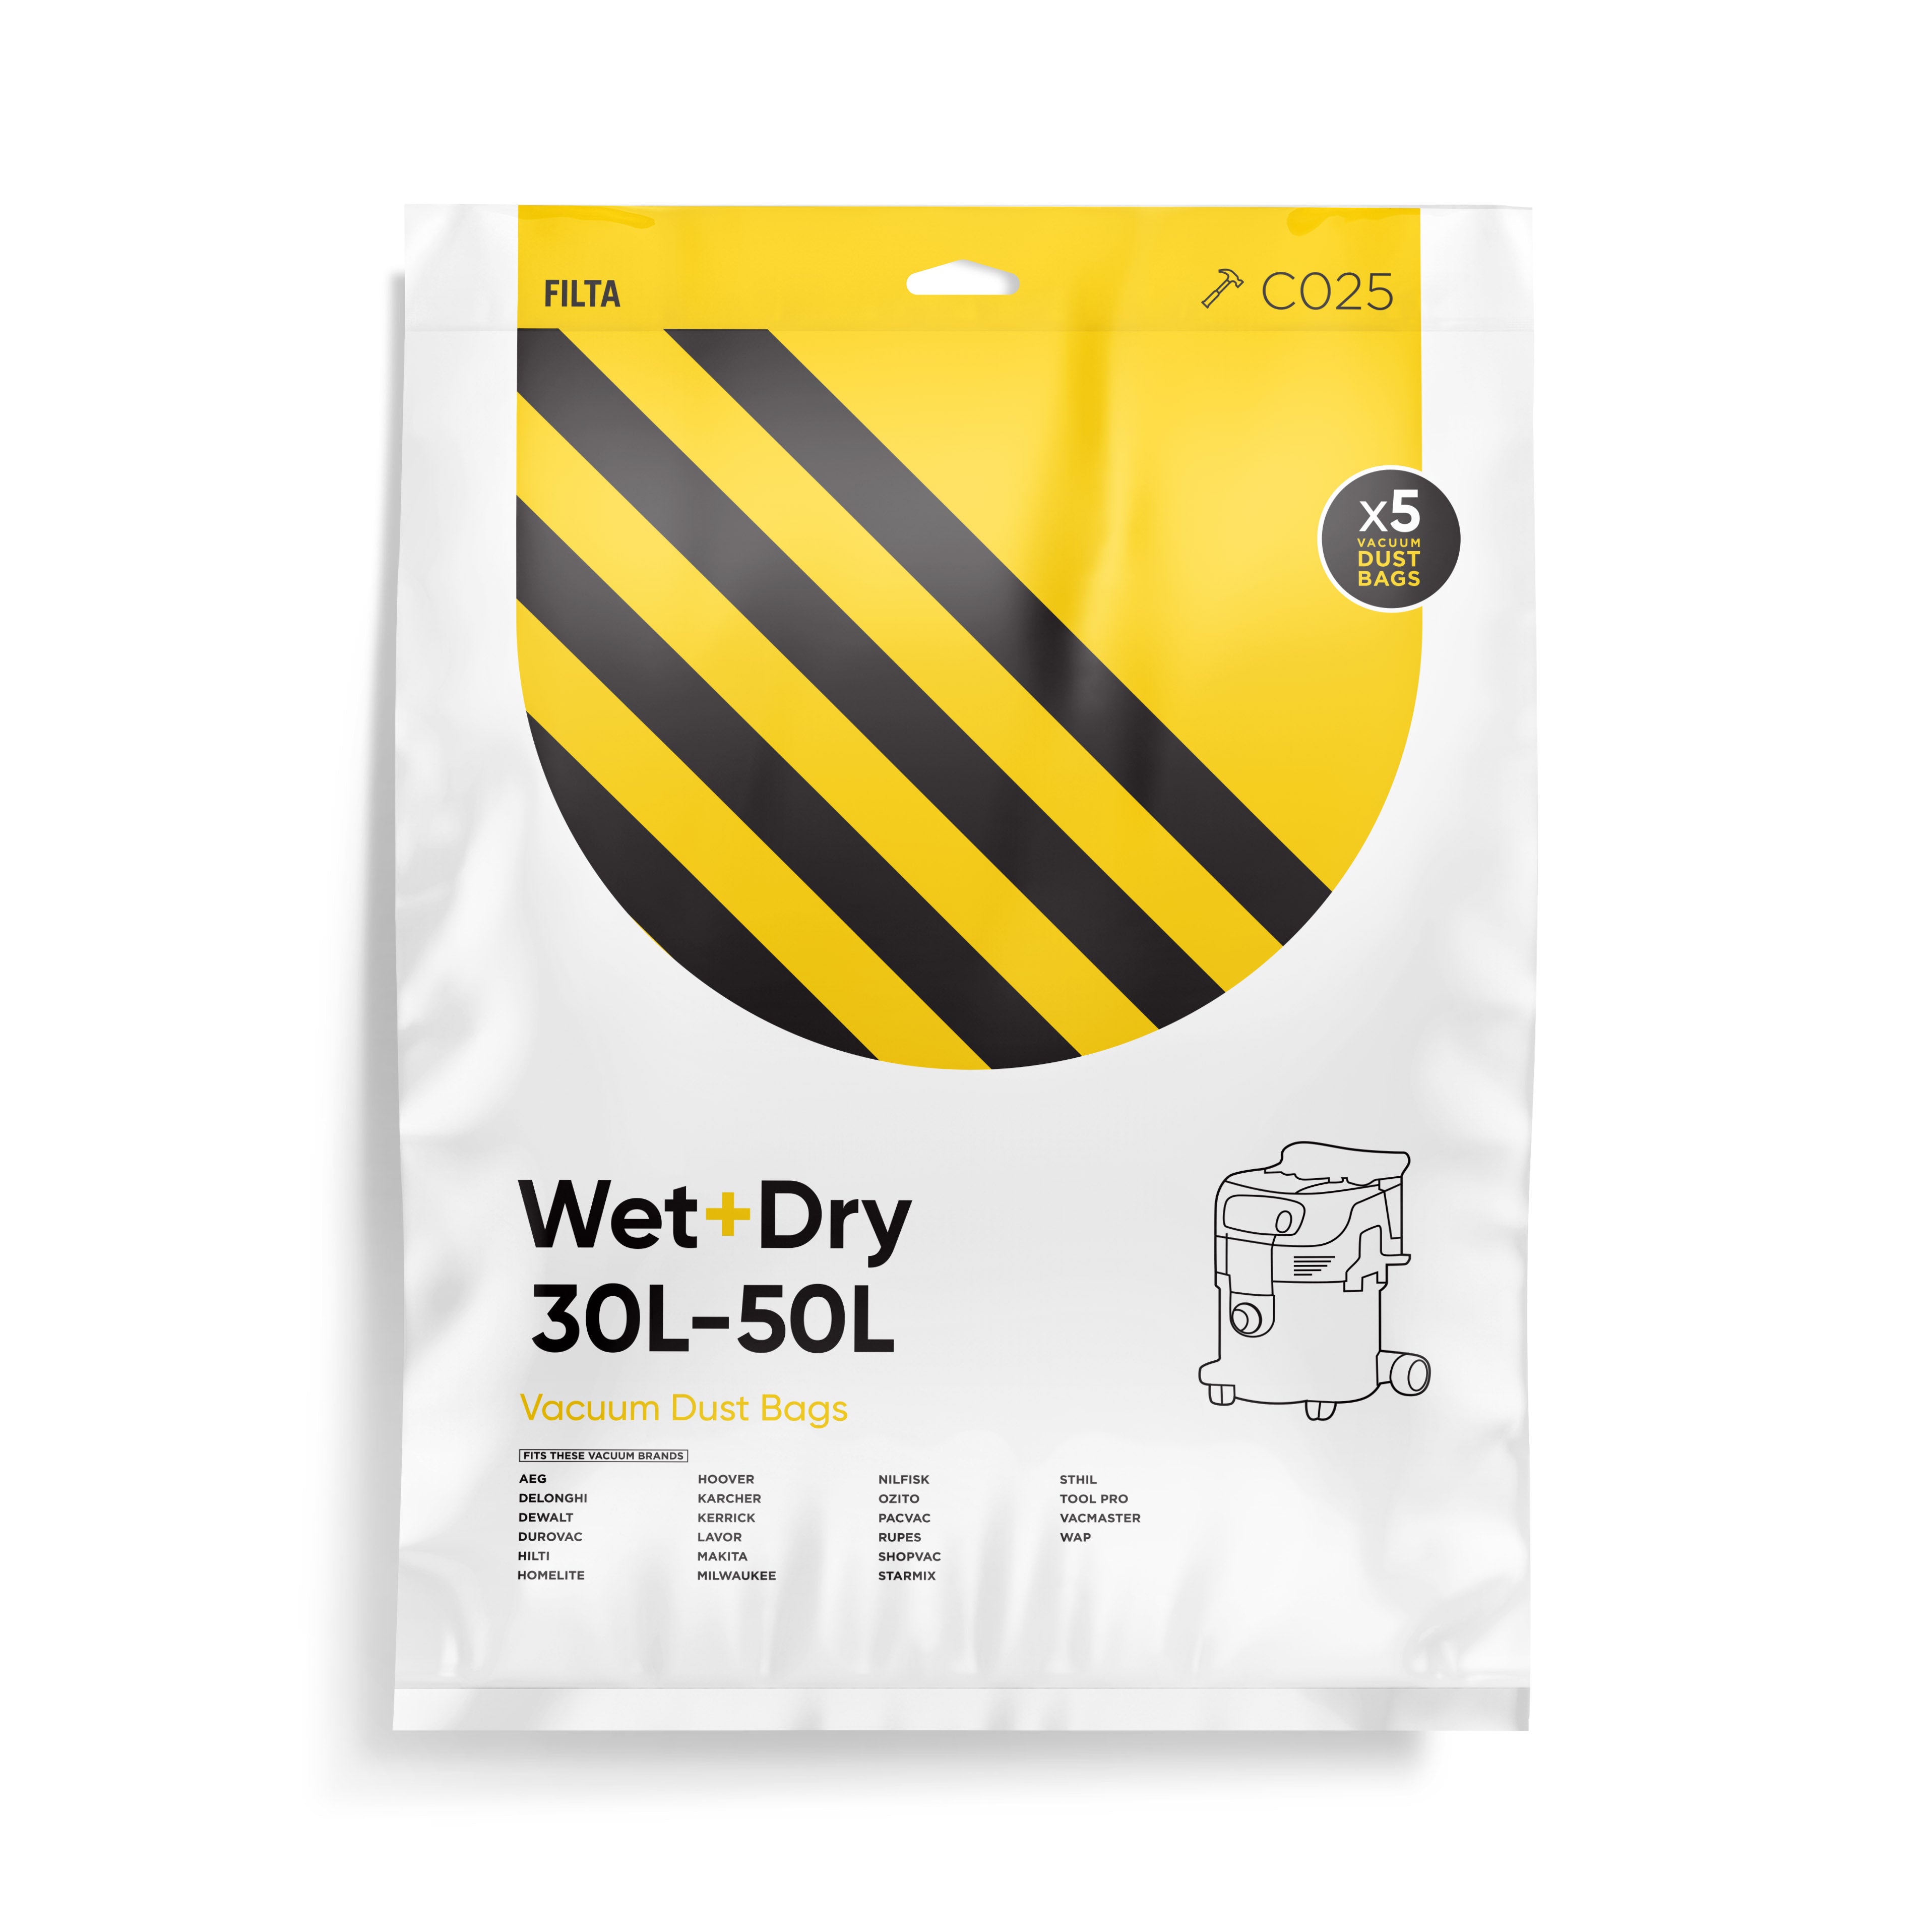 FILTA WET & DRY 50LT SMS MULTI LAYERED VACUUM CLEANER BAGS 5 PACK (C025)